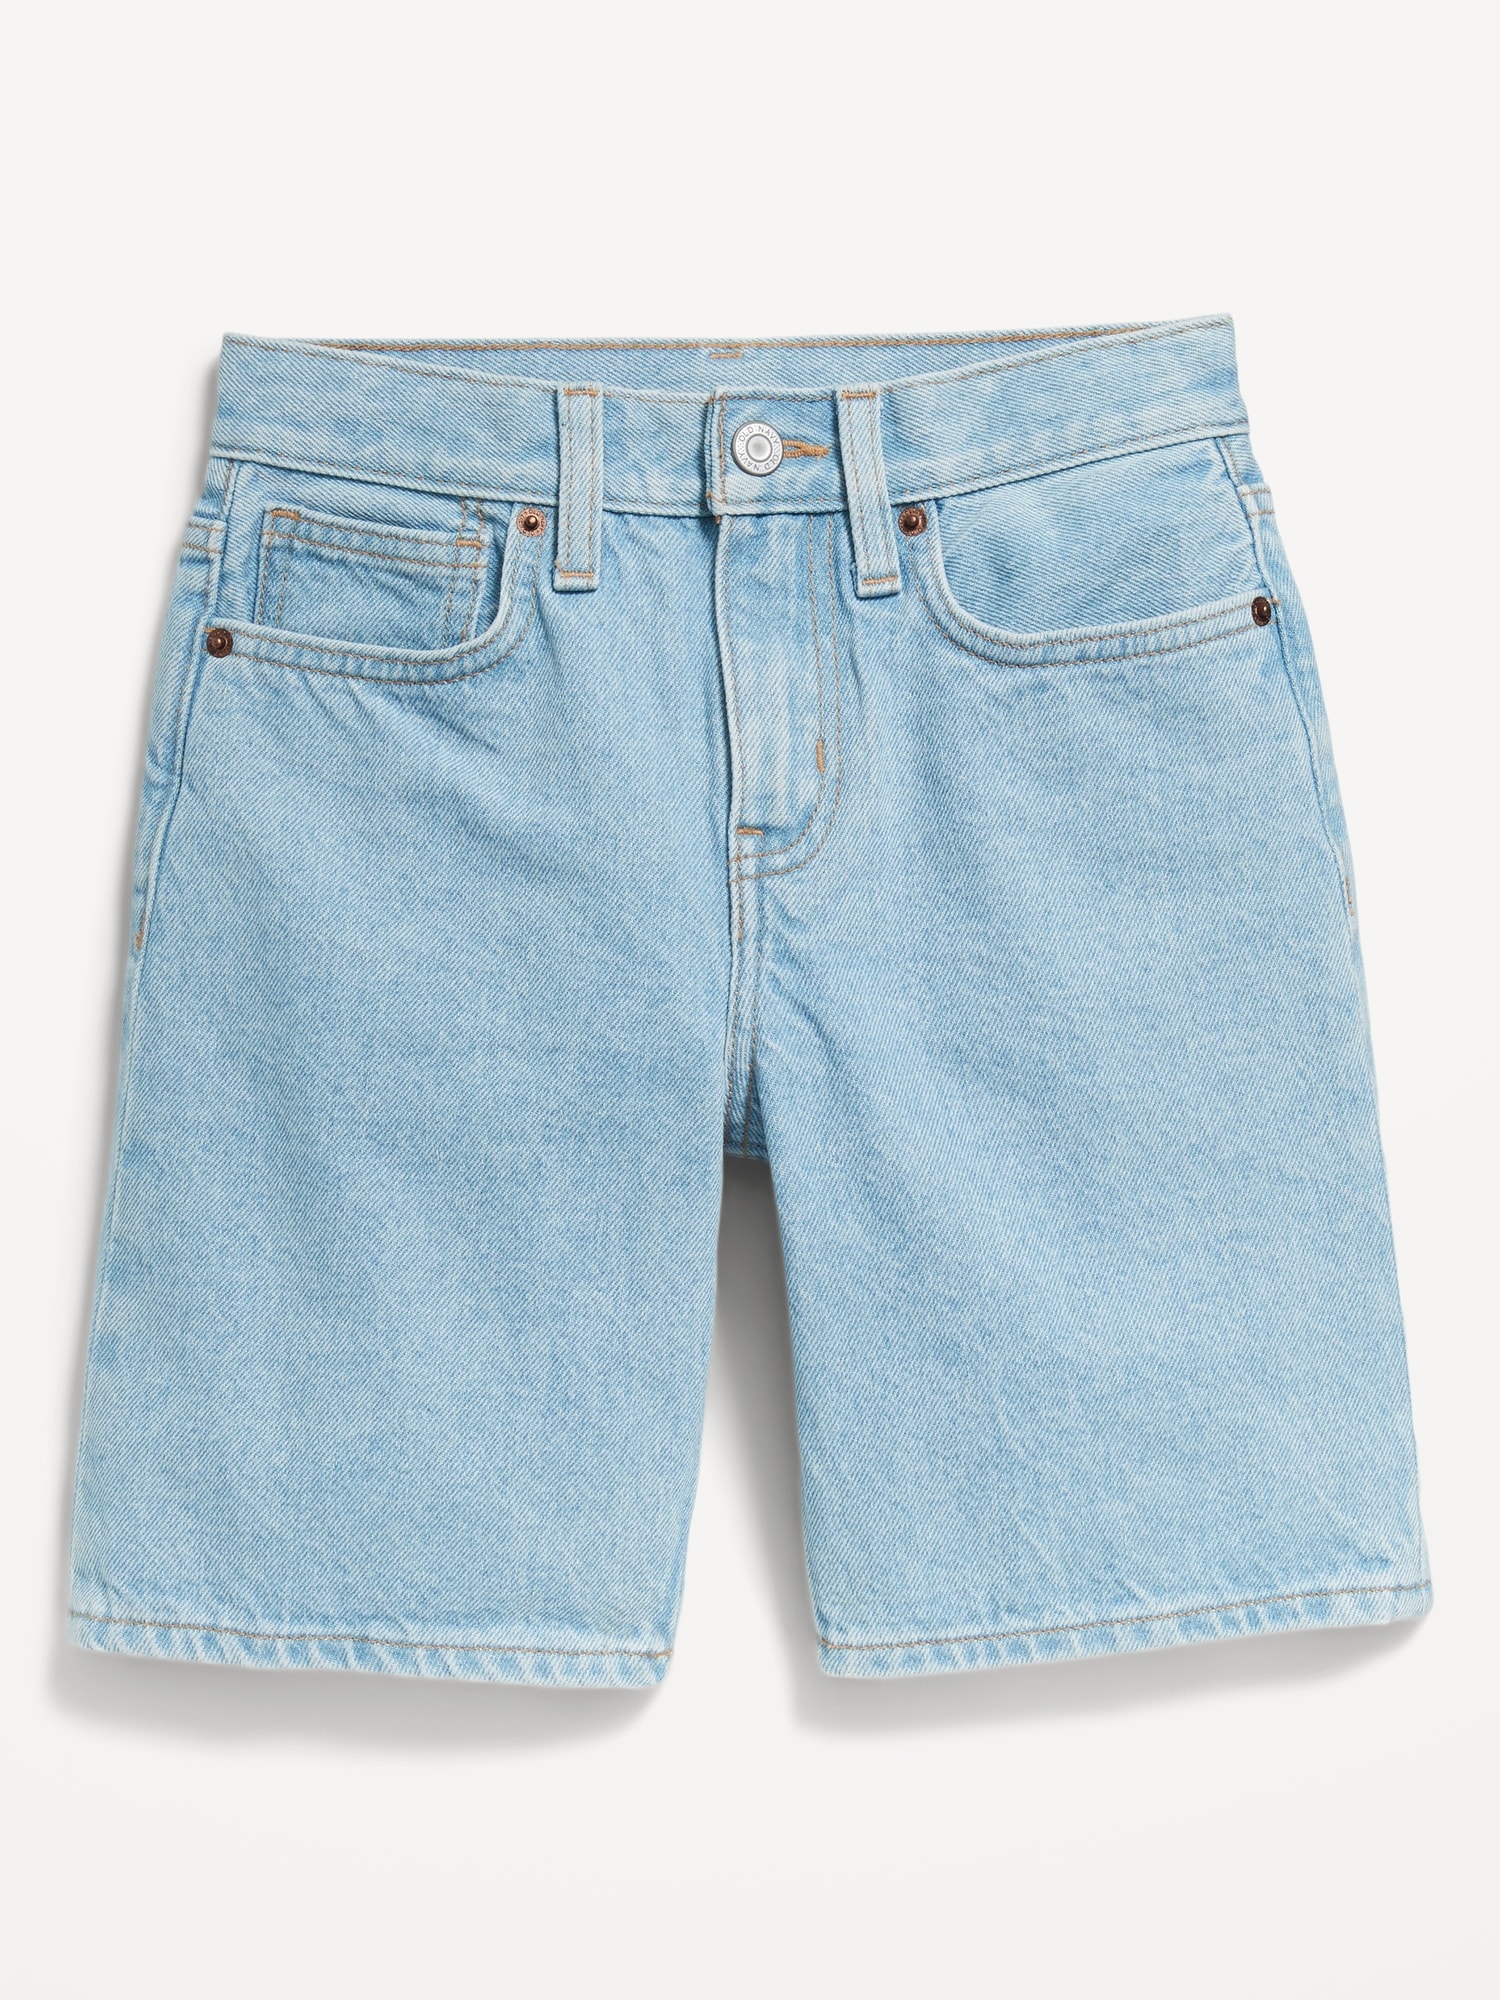 Knee Length Baggy Non-Stretch Jean Shorts for Boys